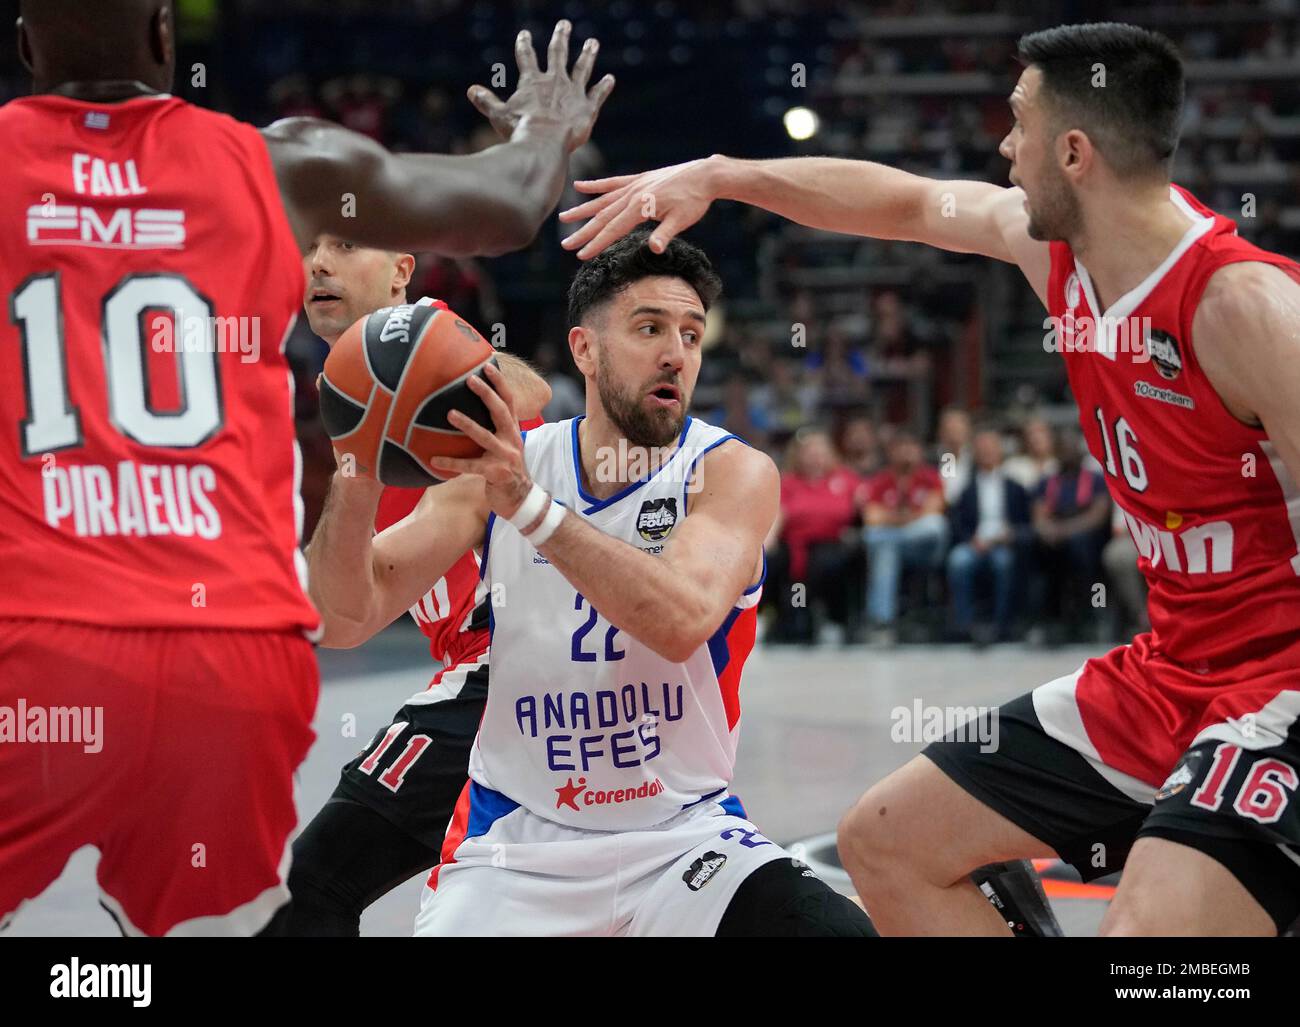 Anadolu Efes Vasilije Micic drives to the basket during a Final Four Euroleague semifinal basketball match between Olympiacos and Anadolu Efes, in Belgrade, Serbia, Thursday, May 19, 2022